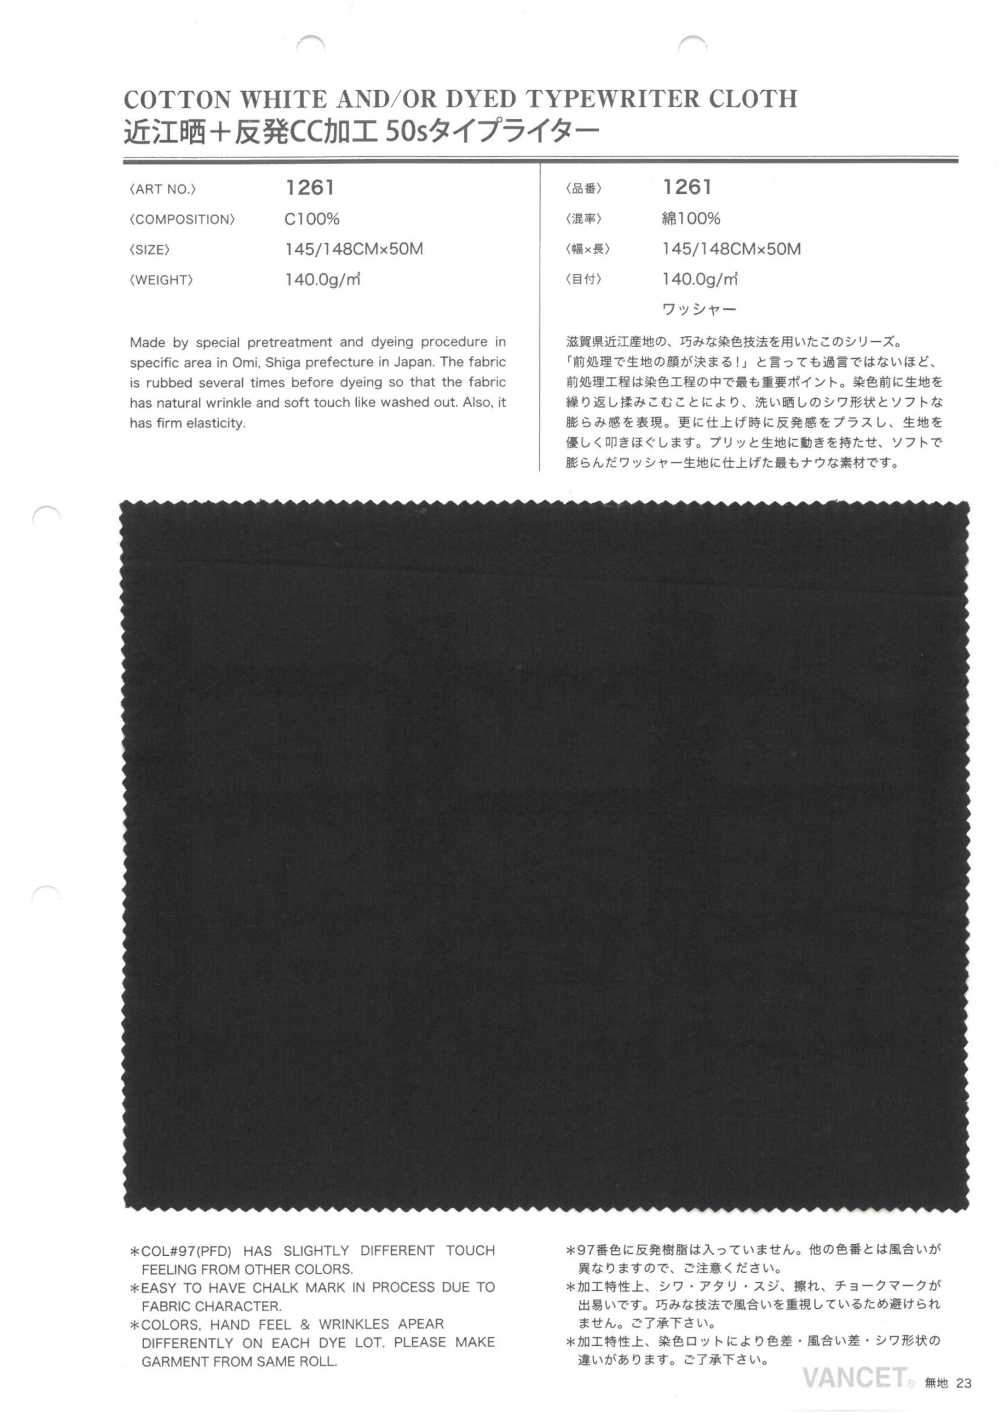 1261 Omi Bleached + Roll CC Processing 50 Single Thread Typewritter Cloth[Textile / Fabric] VANCET